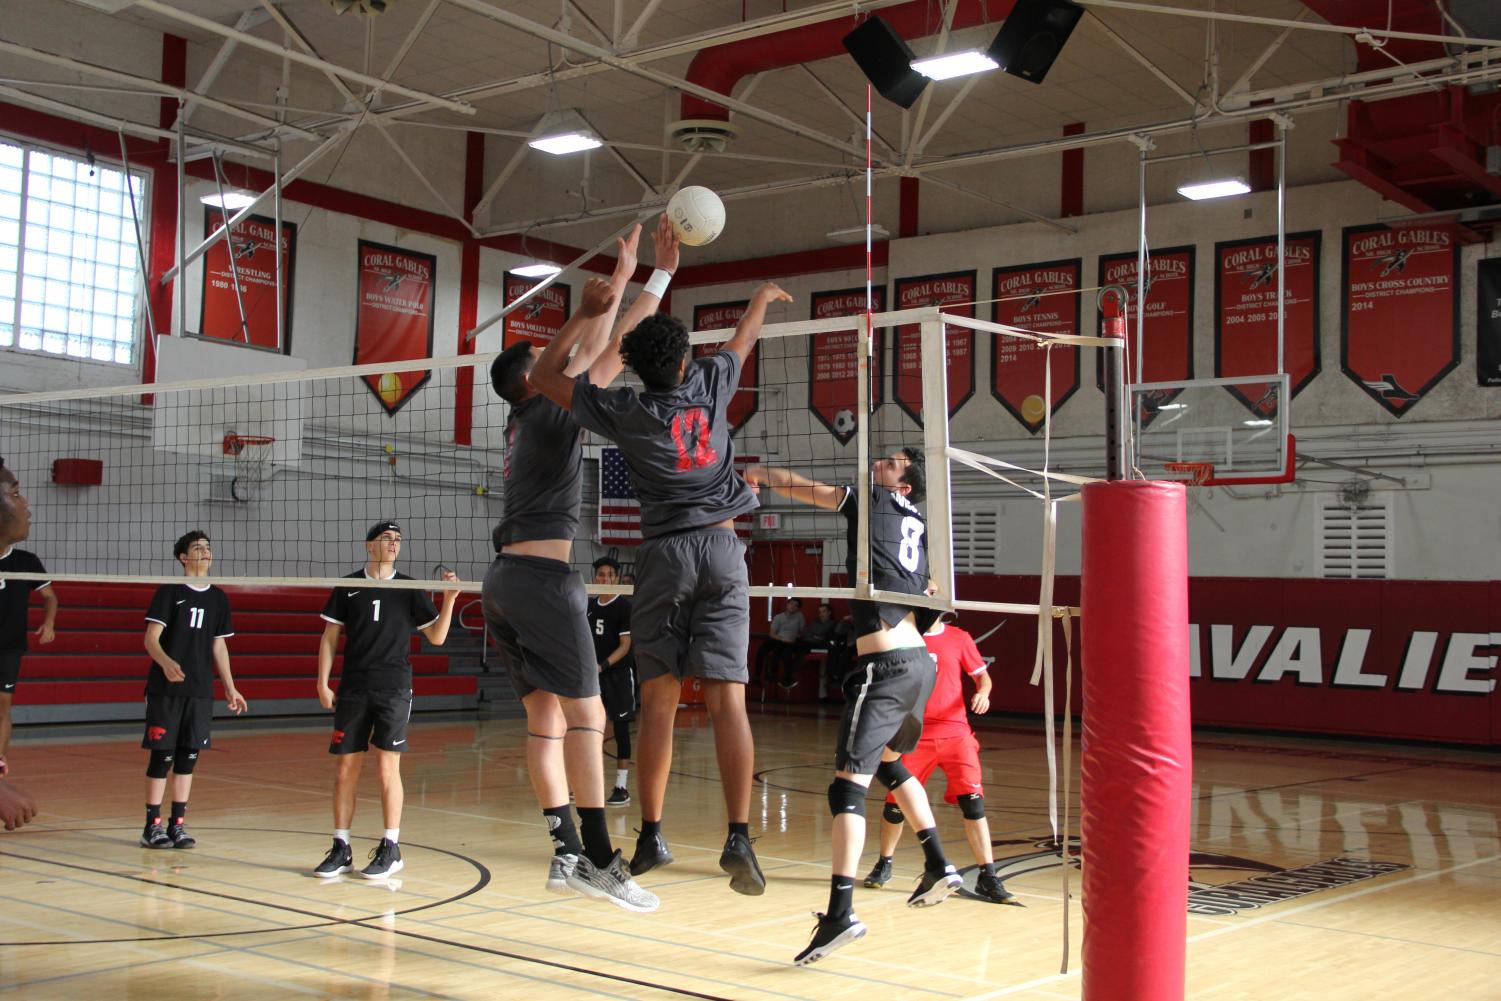 Gables+Volleyball+Starts+Off+Strong+Against+Westland